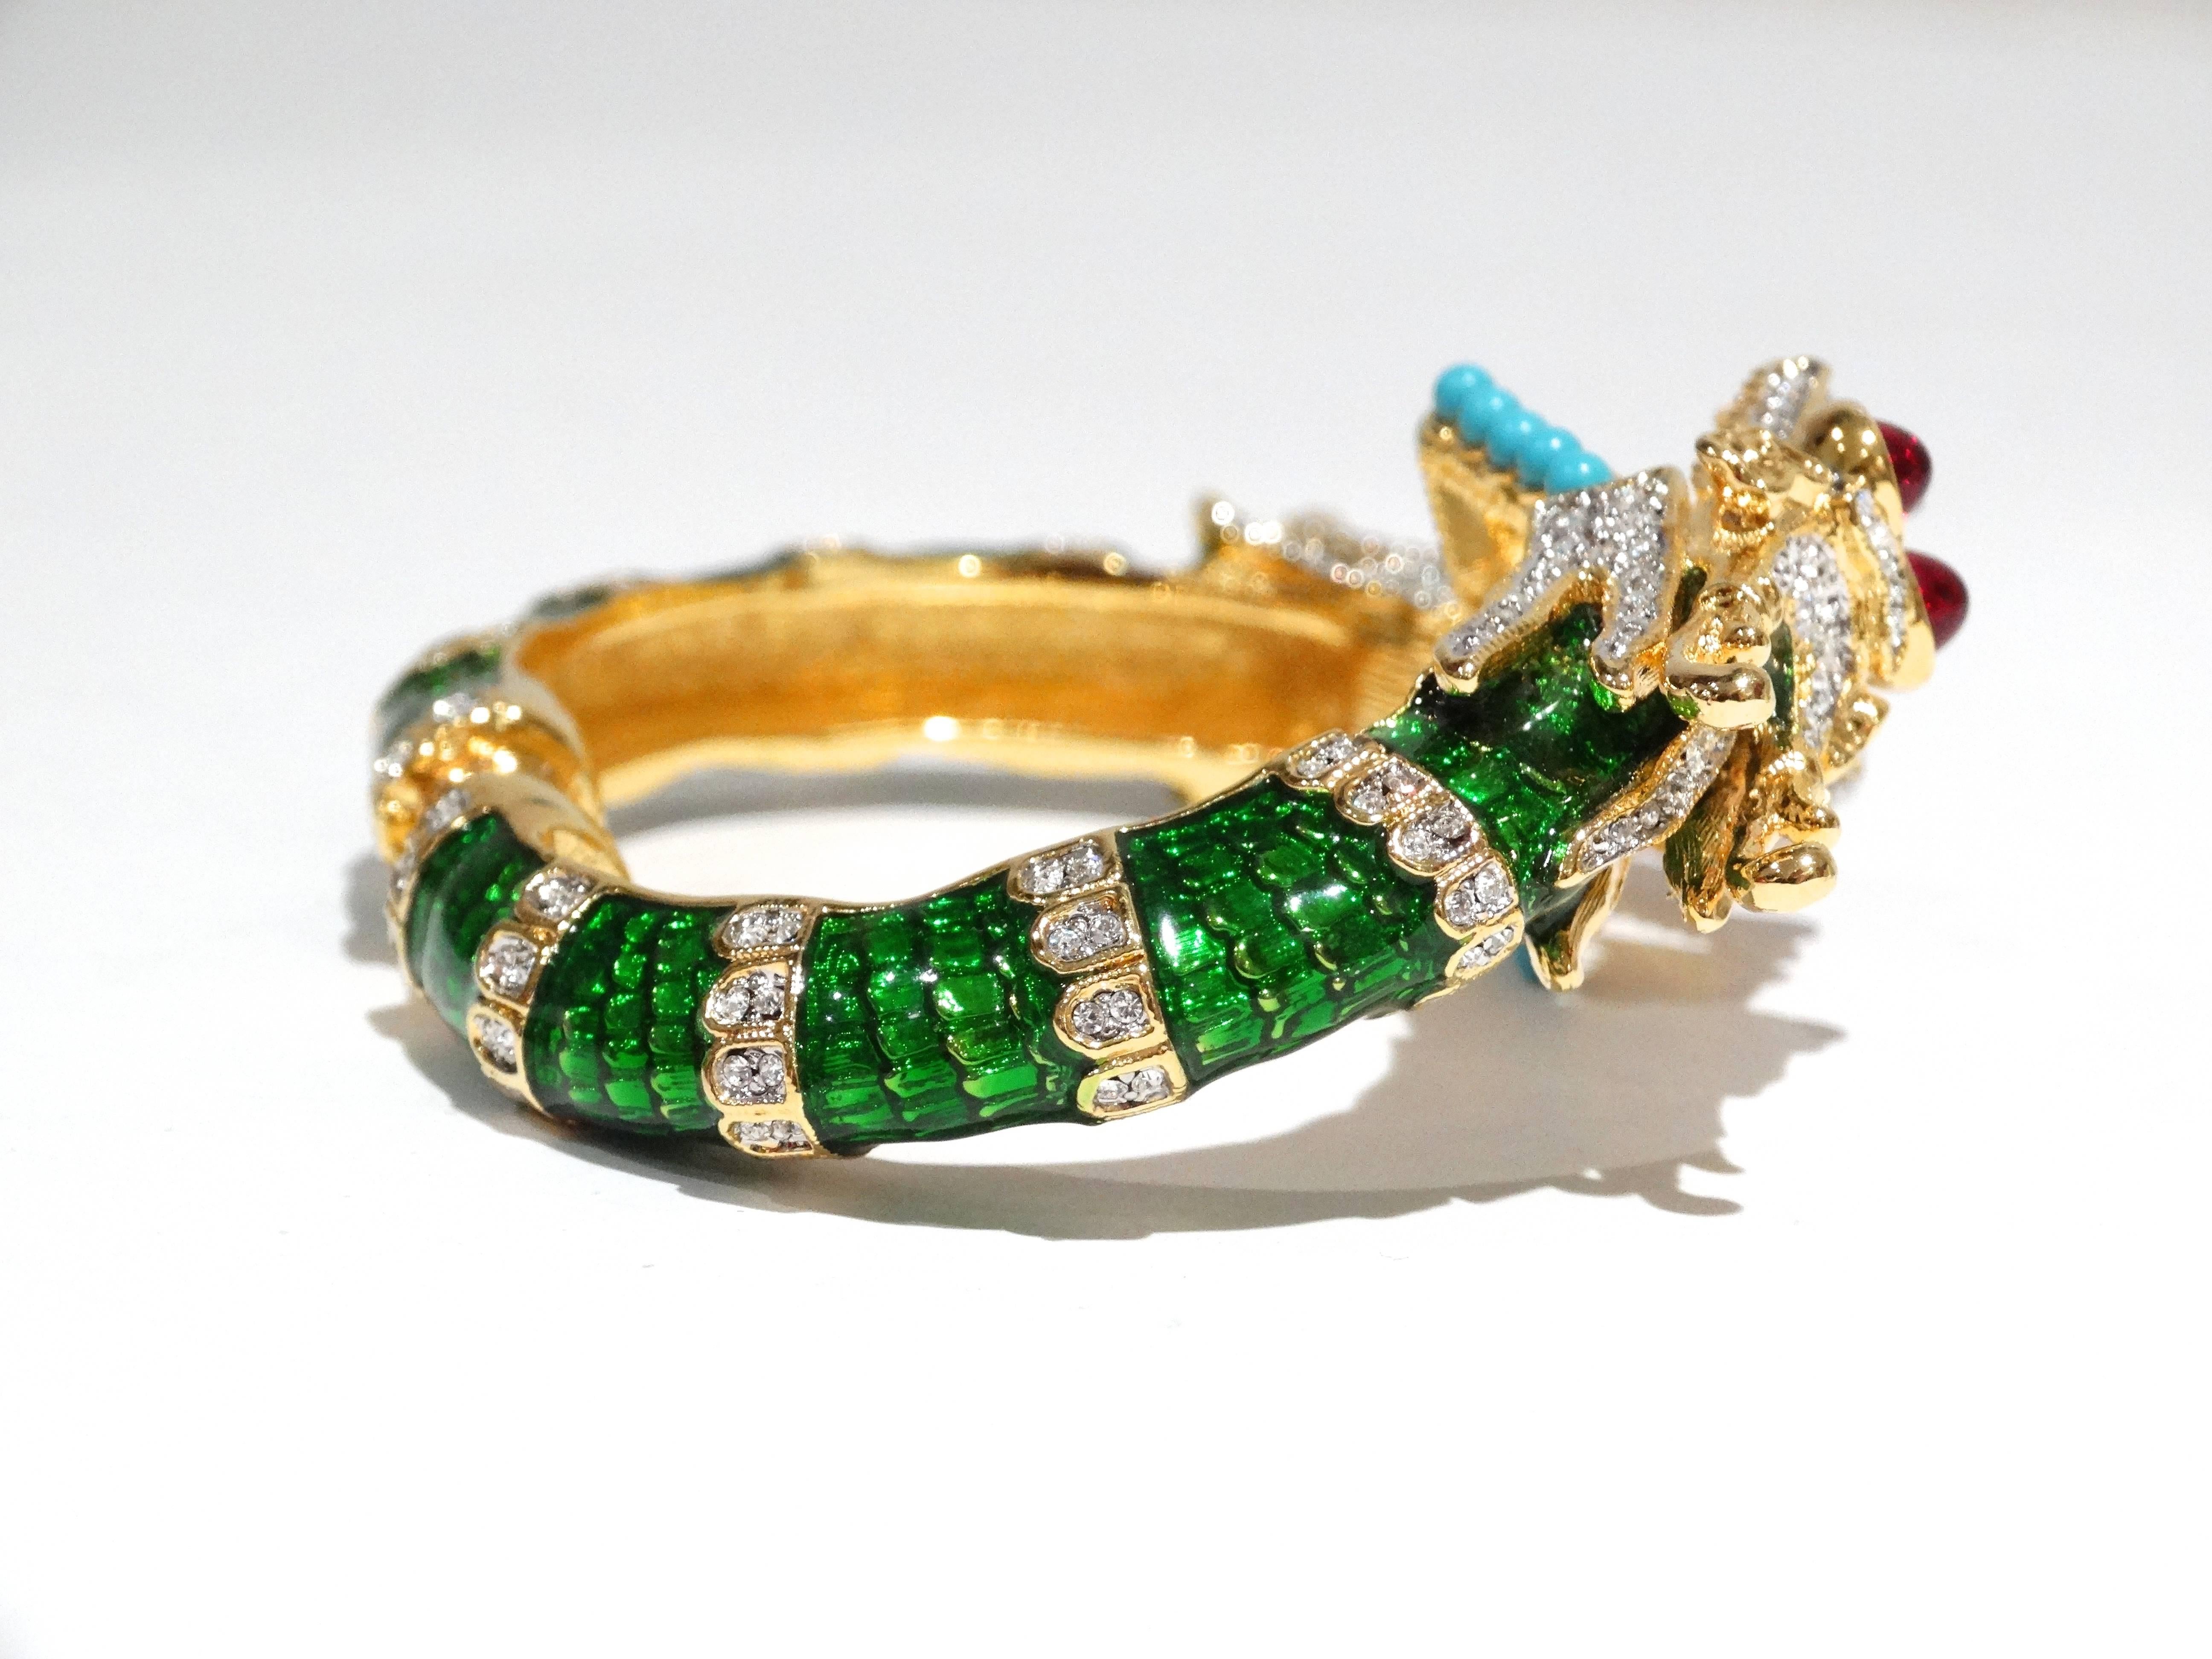 Limited Year of the Dragon Bracelet circa 1980's is certified a limited edition original by Kenneth Jay Lane. This piece is 12/500 . Details: From the Kenneth Jay Lane Couture collection. This absolutely fabulous bracelet is a bestseller! 